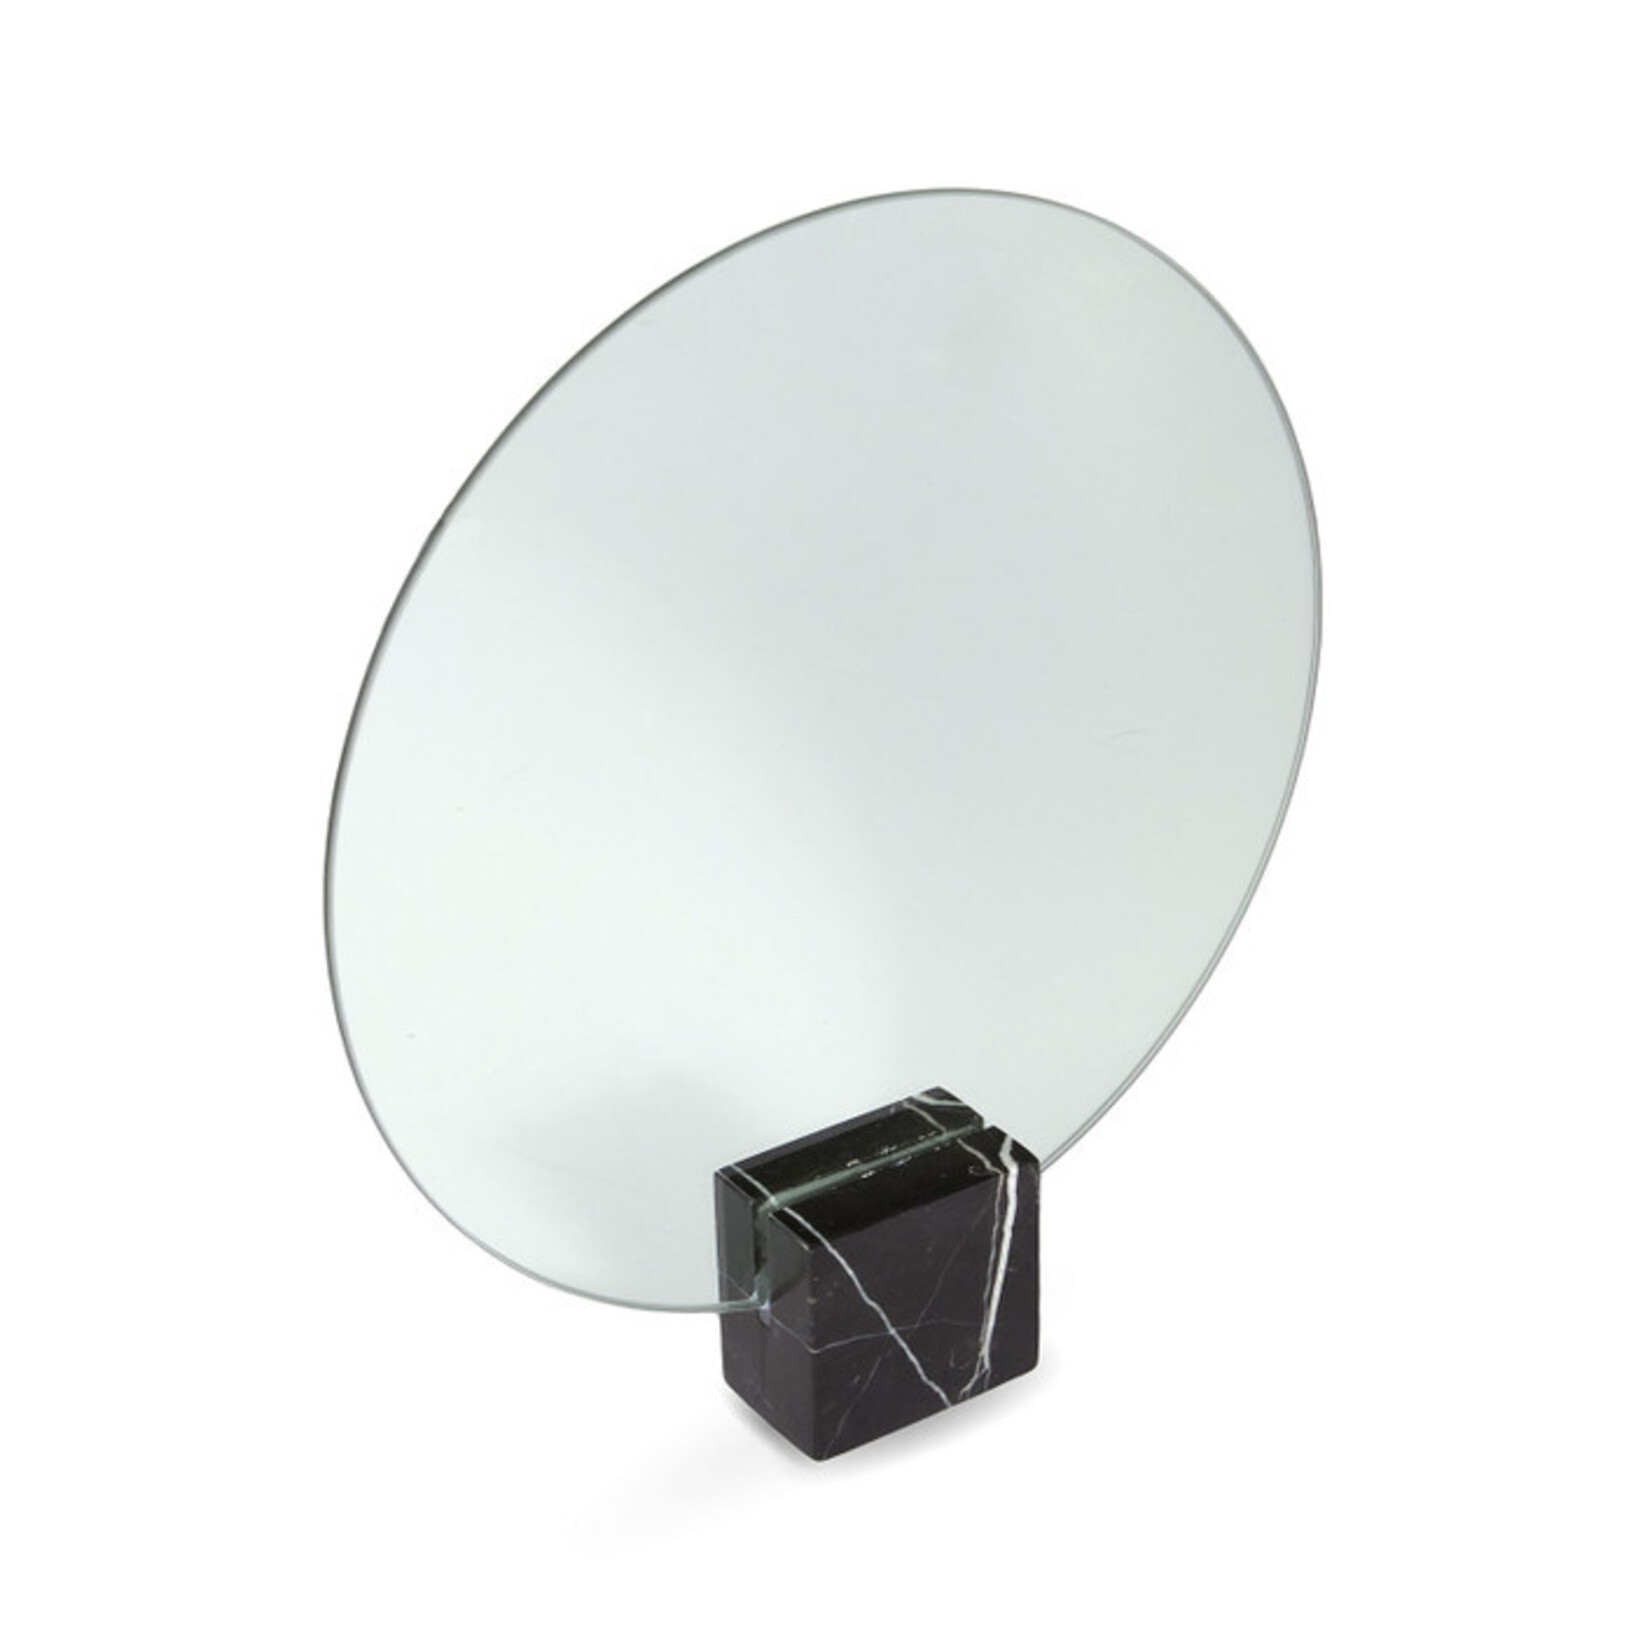 Style in Form Moon Mirror - Black base